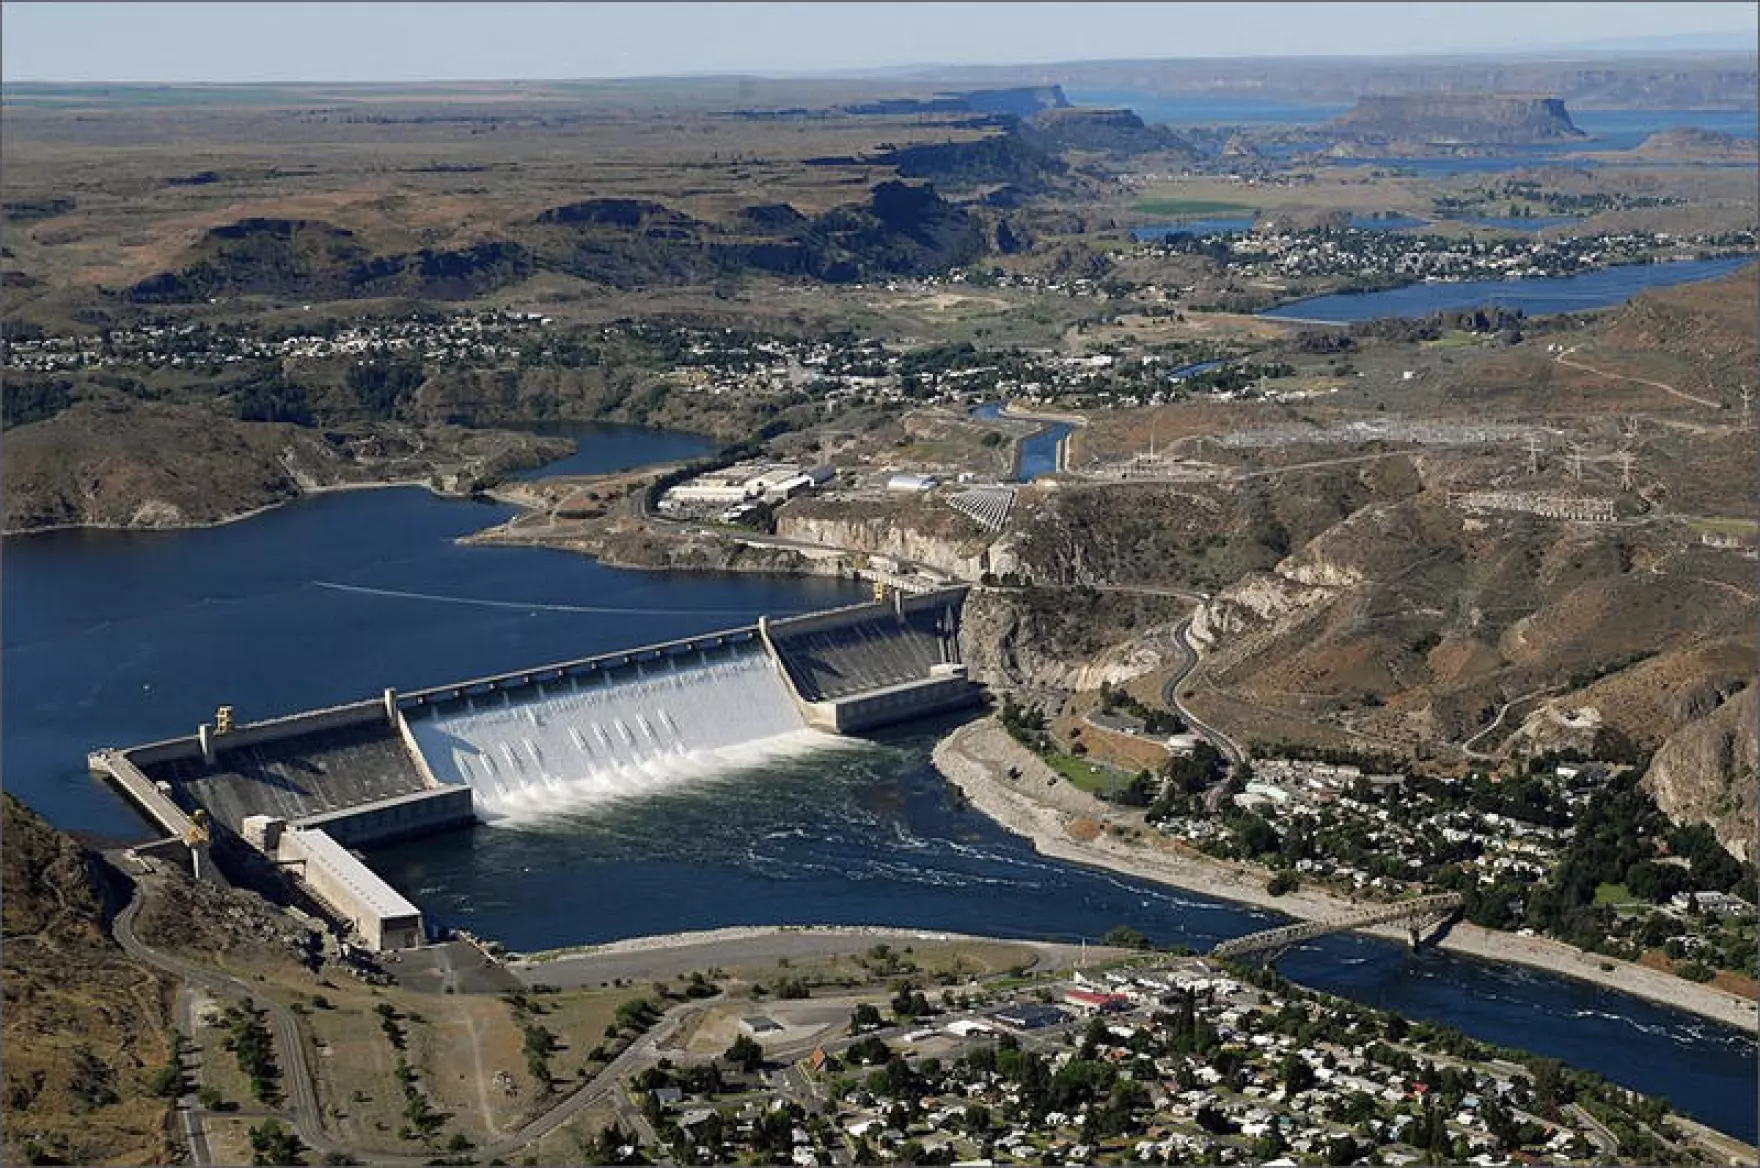 Grand Coulee Dam. Salmon advocates would like an updated Columbia River Treaty to include salmon and a functioning ecosystem